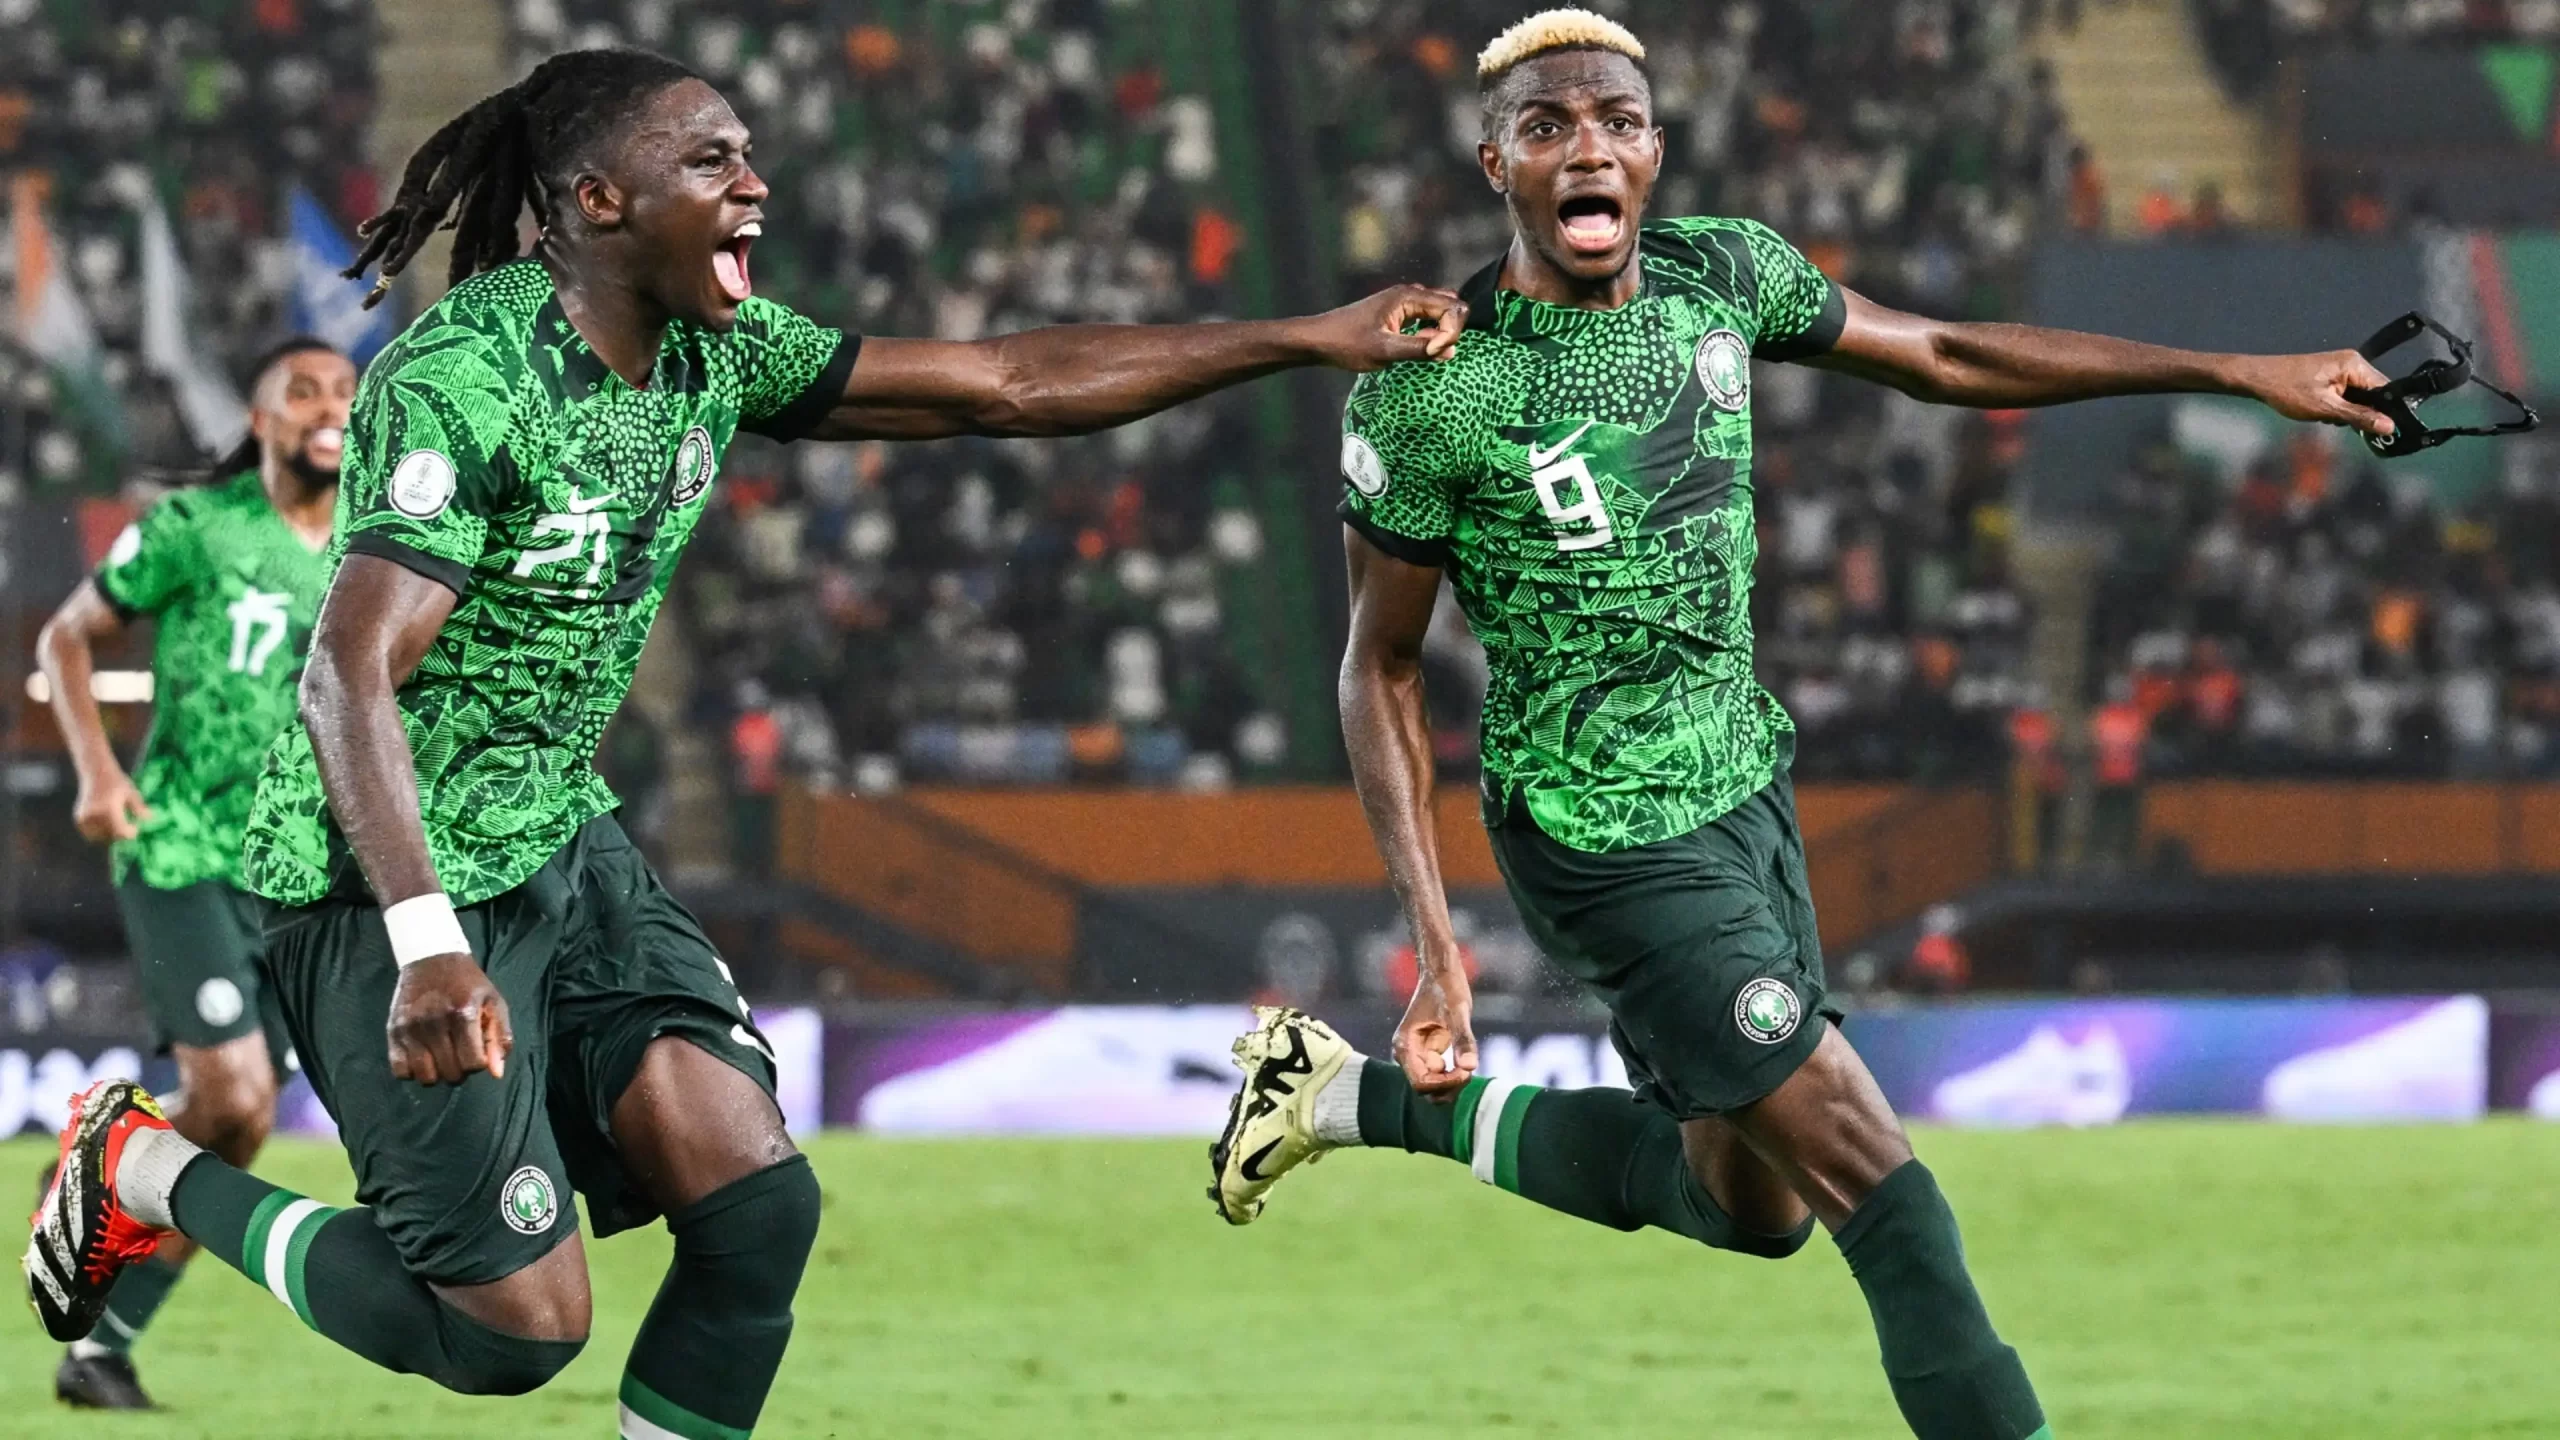 Nigeria defeats South Africa to reach Africa Cup of Nations final